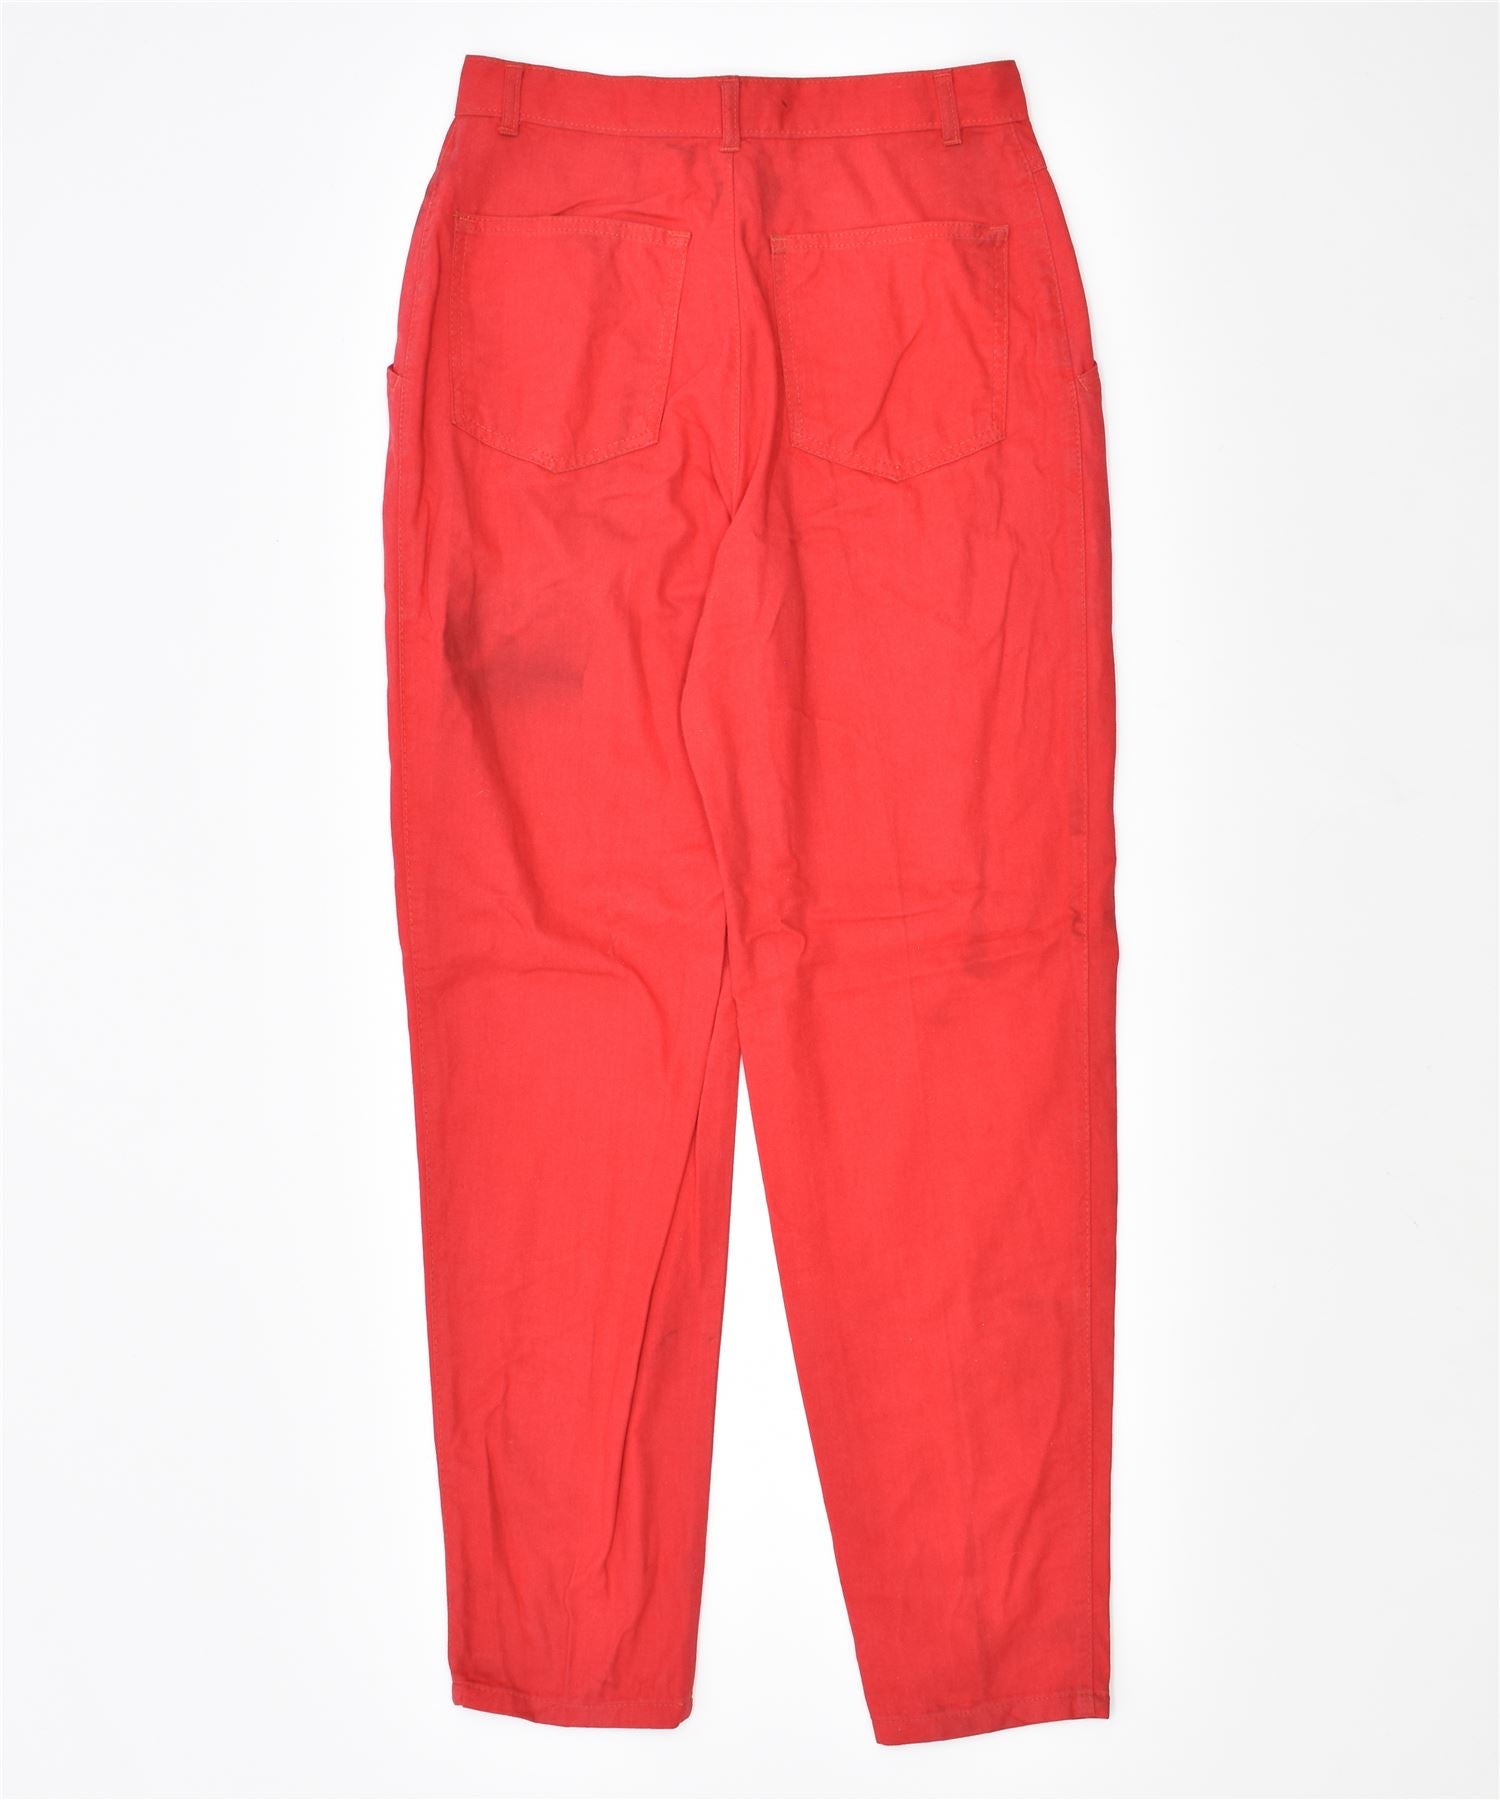 United Colors of Benetton Trousers - Chinos - Boozt.com